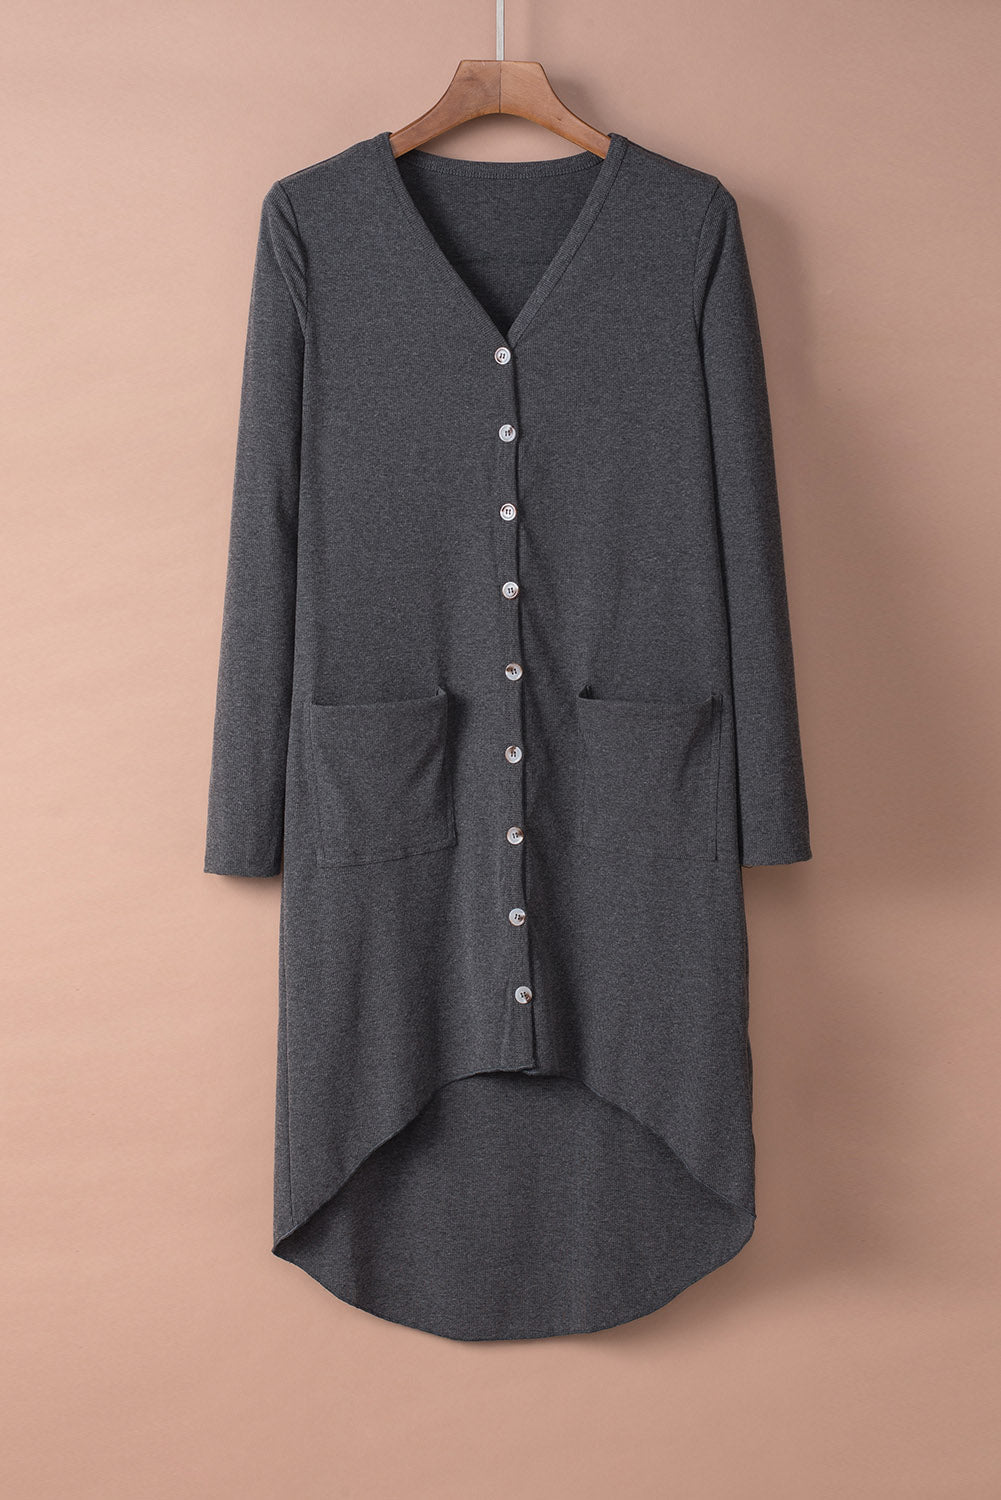 Selected Button Down Pocketed High Low Cardigan